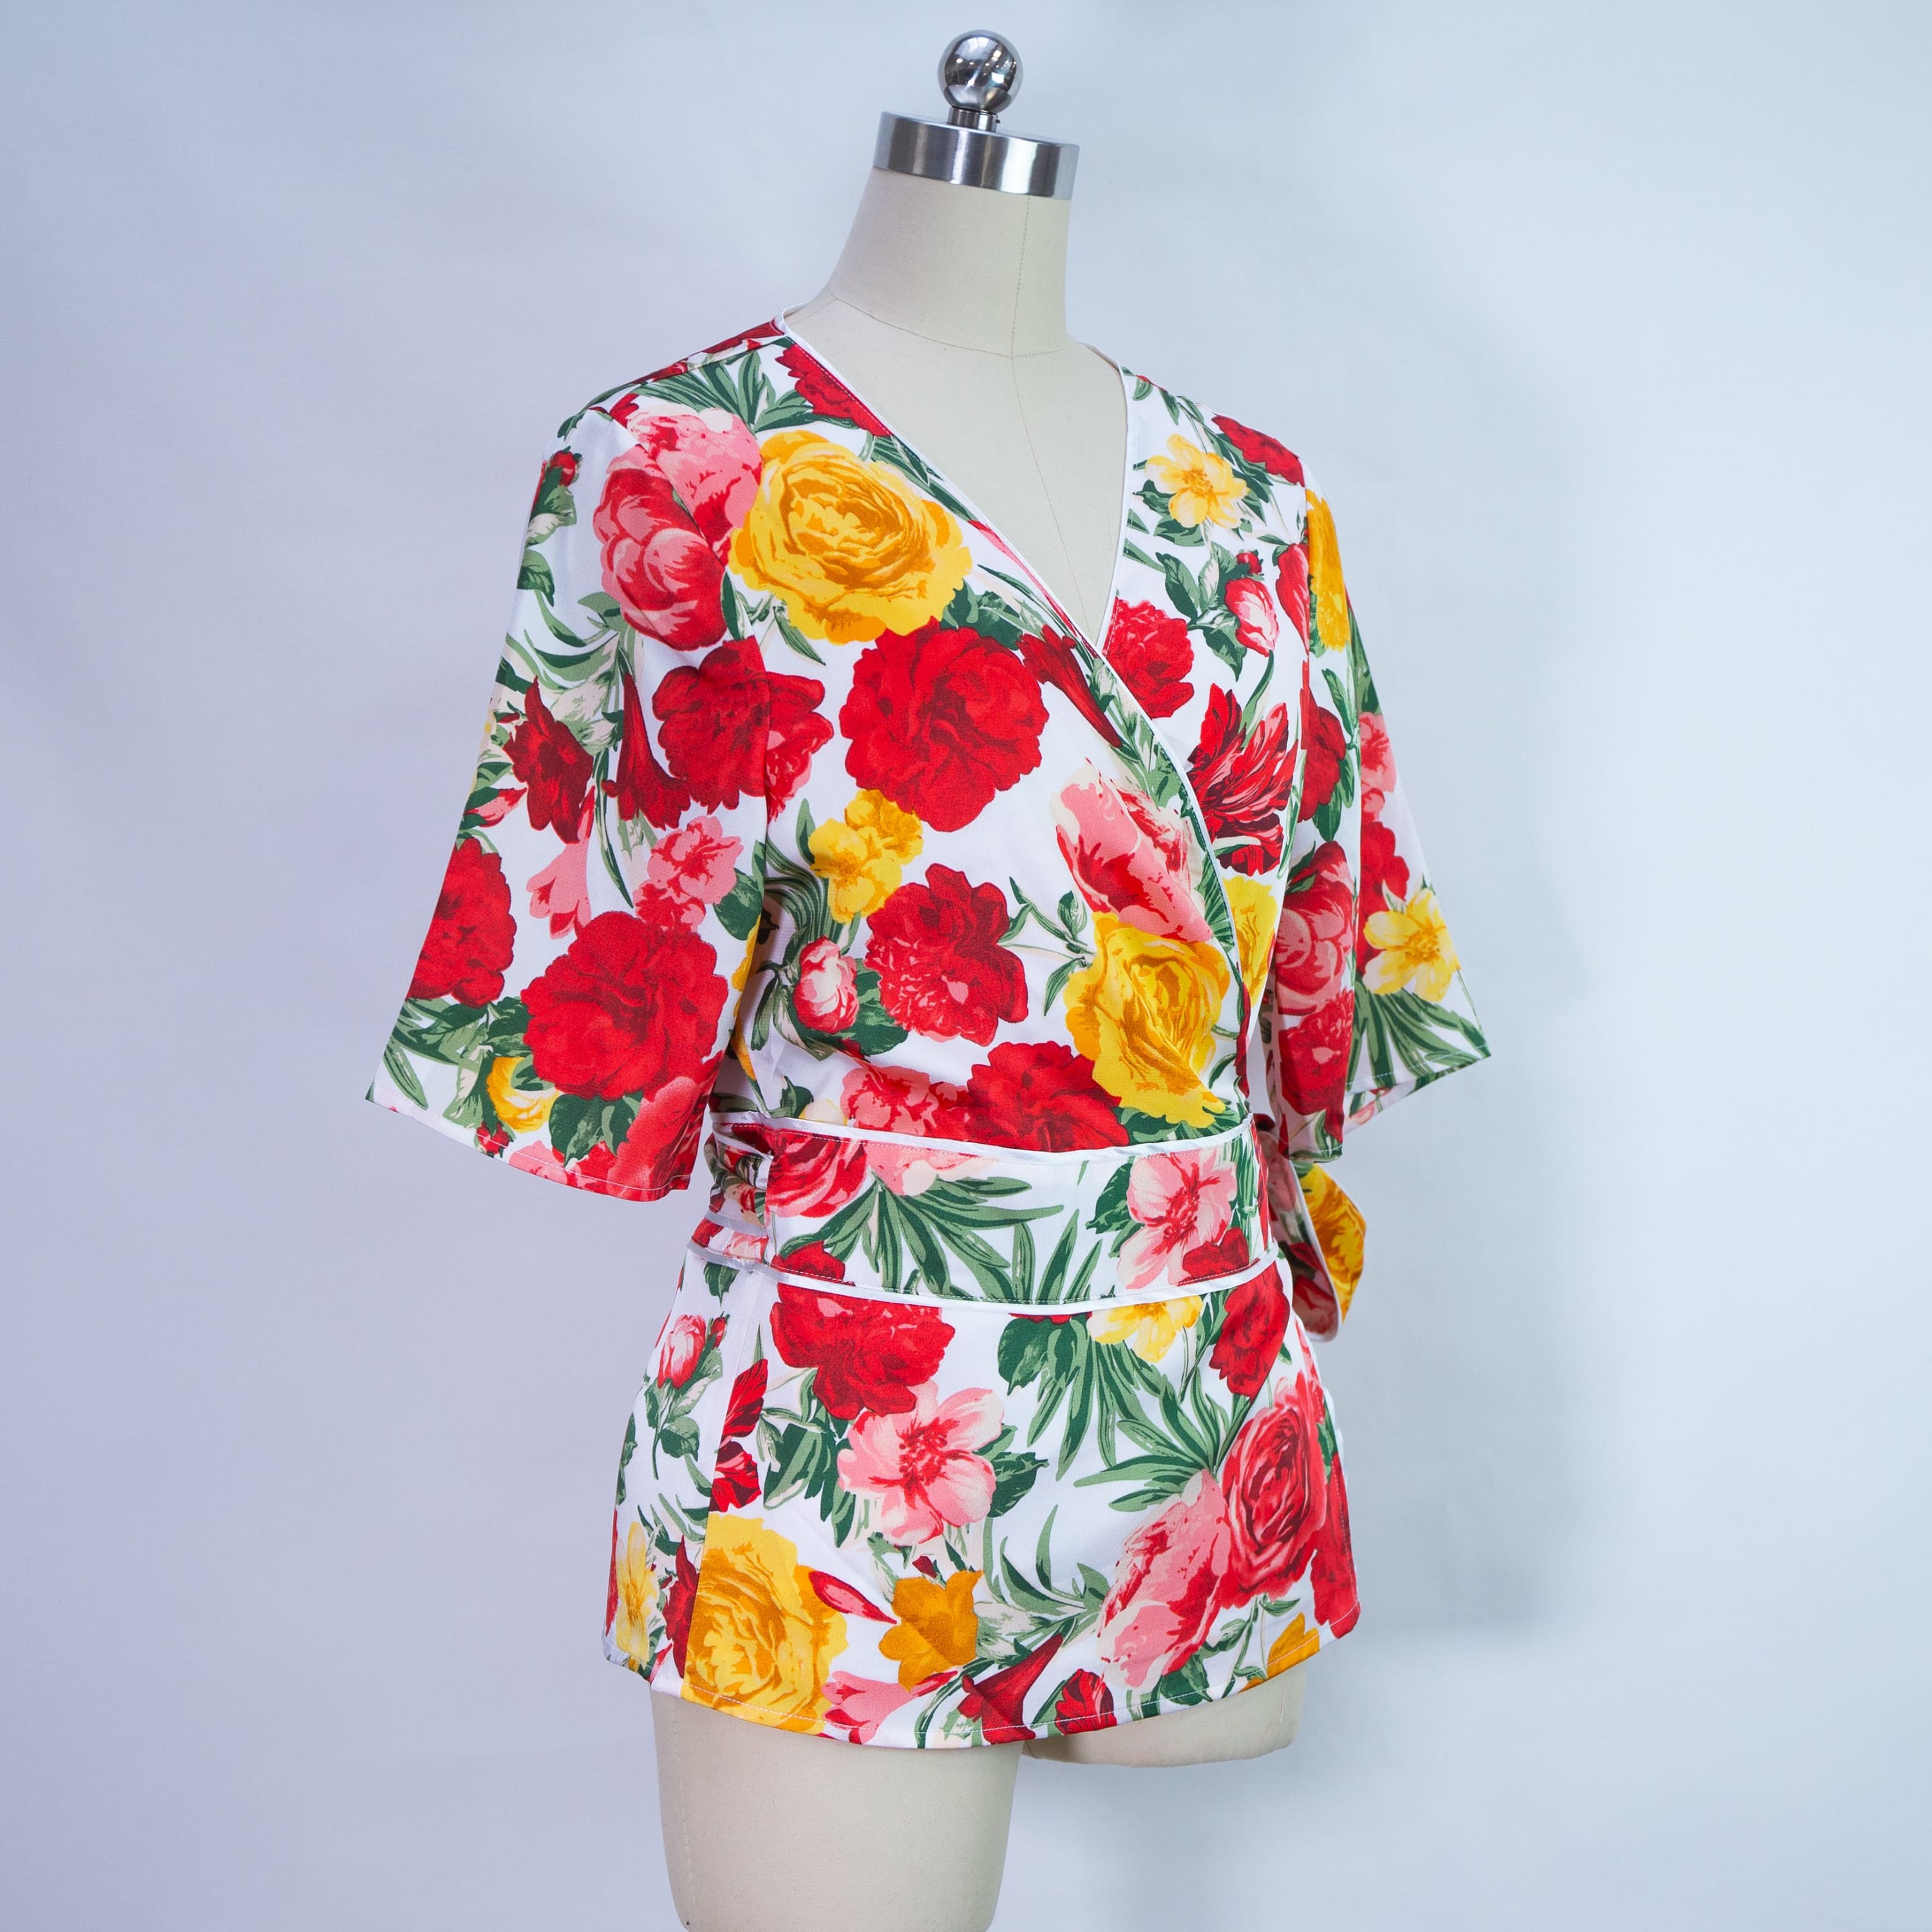 Calleis red Studio blouse - Blouses and tunics